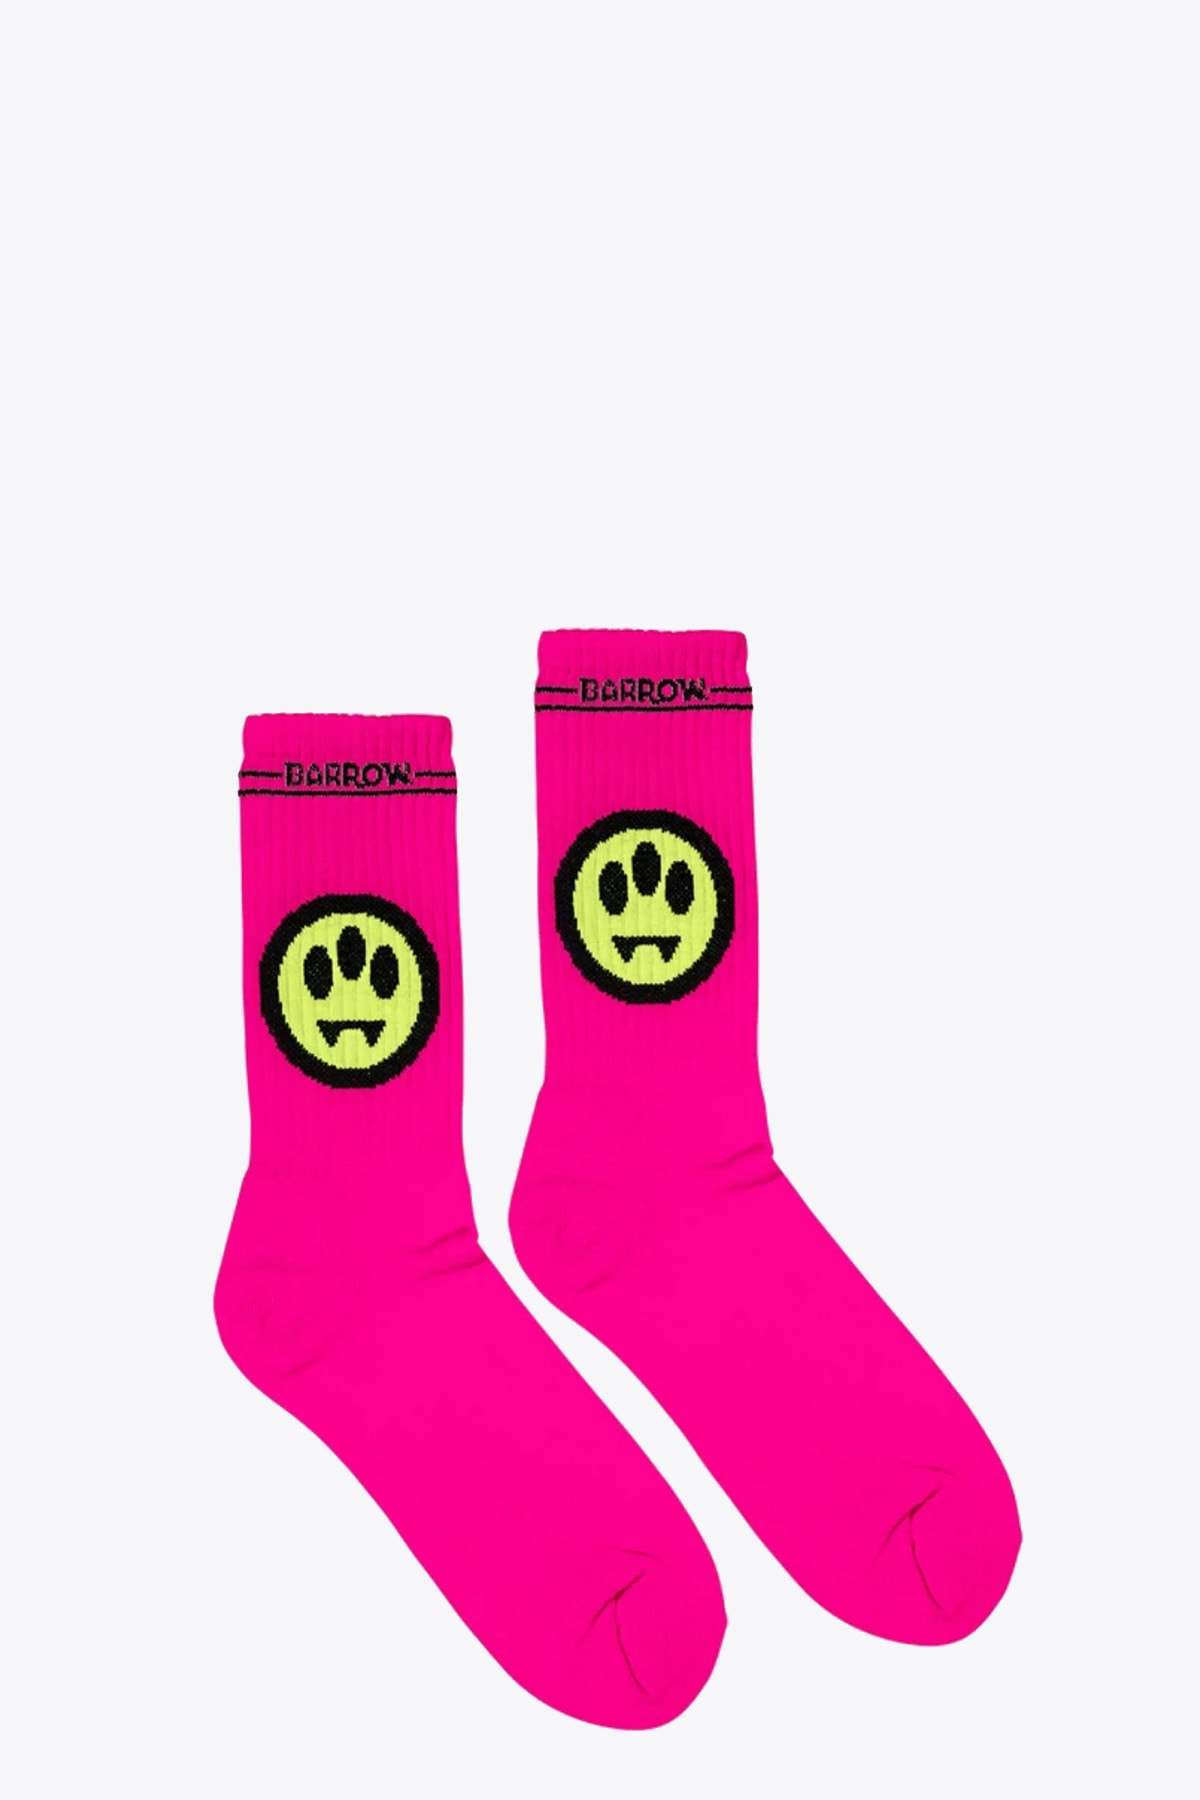 Barrow Socks Unisex Bright pink cotton socks with smile and logo